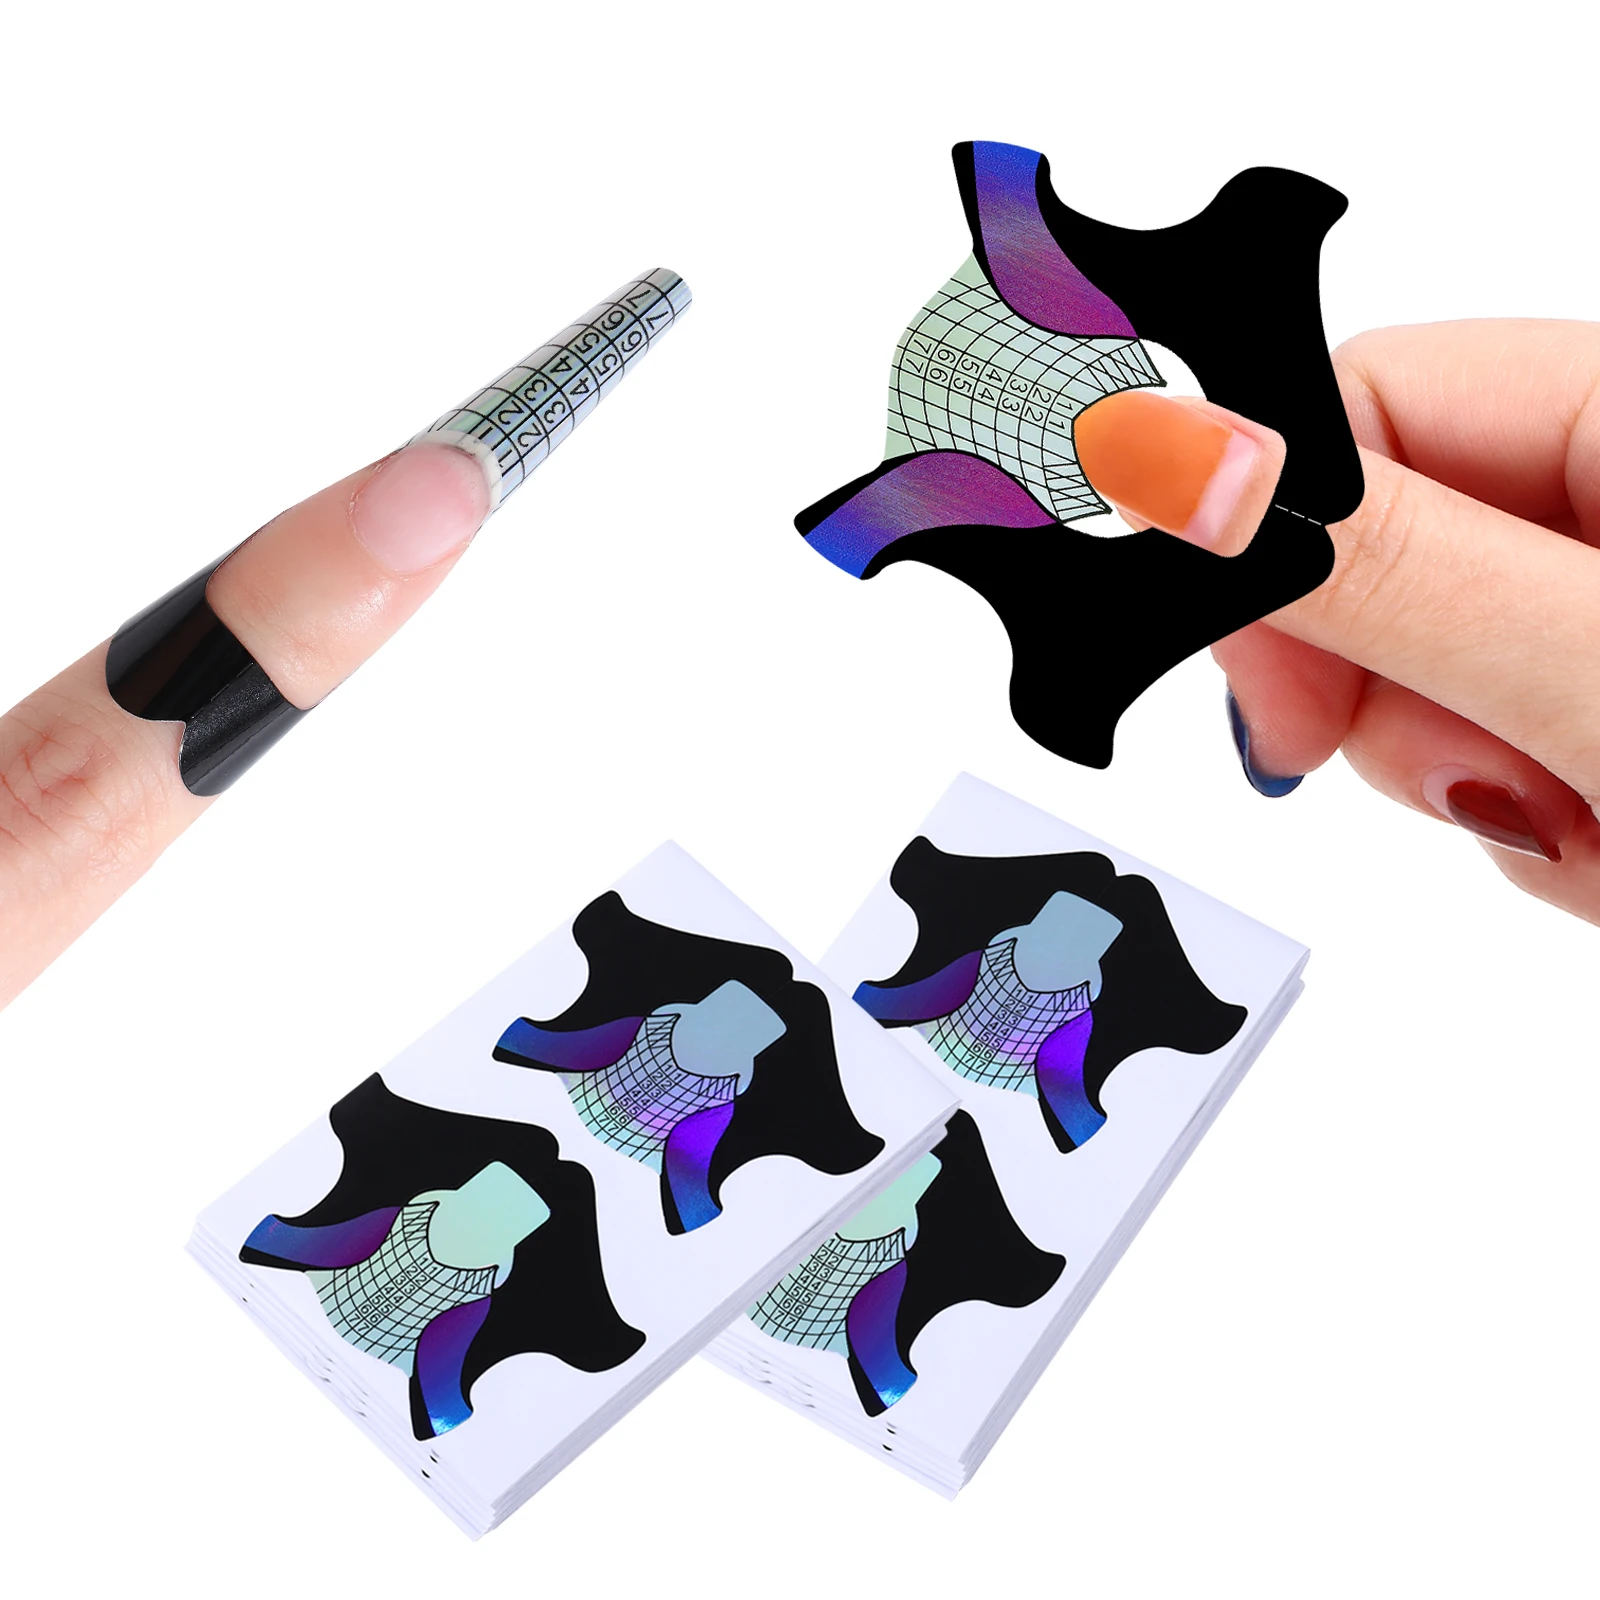 

Pro 3 in 1 100/300pcs Nail Forms Pattern Square Rhombus Stiletto Tips Acrylic Curve UV Gel Nails Extension Nail Art Tool Guide